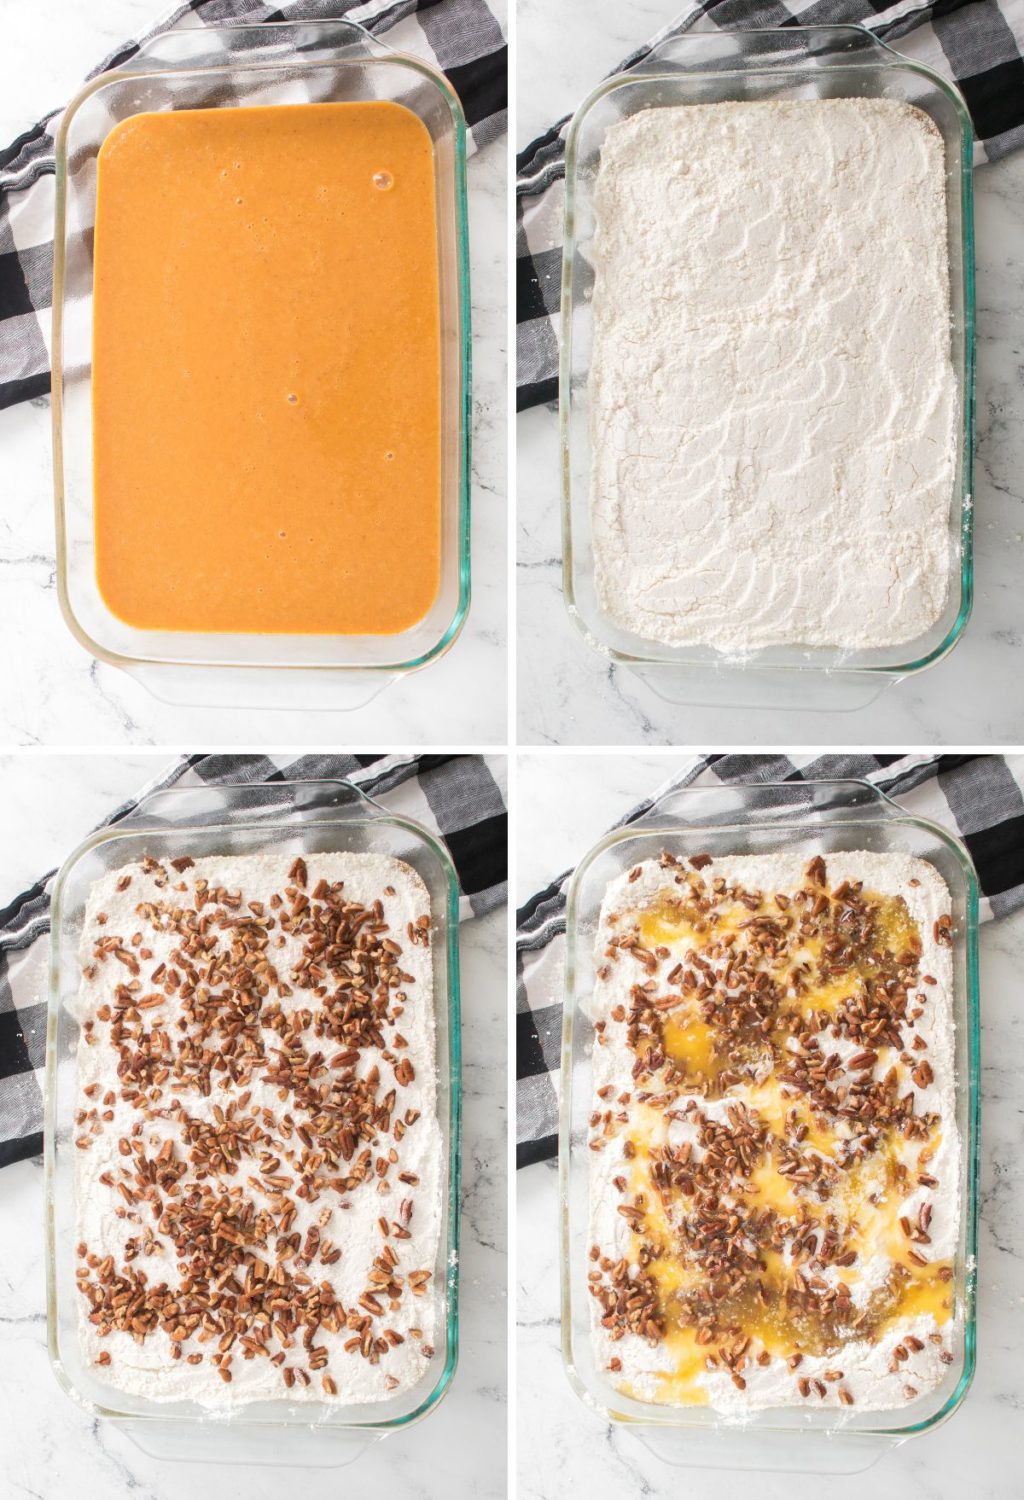 Four pictures showing how to make a pumpkin cheesecake.